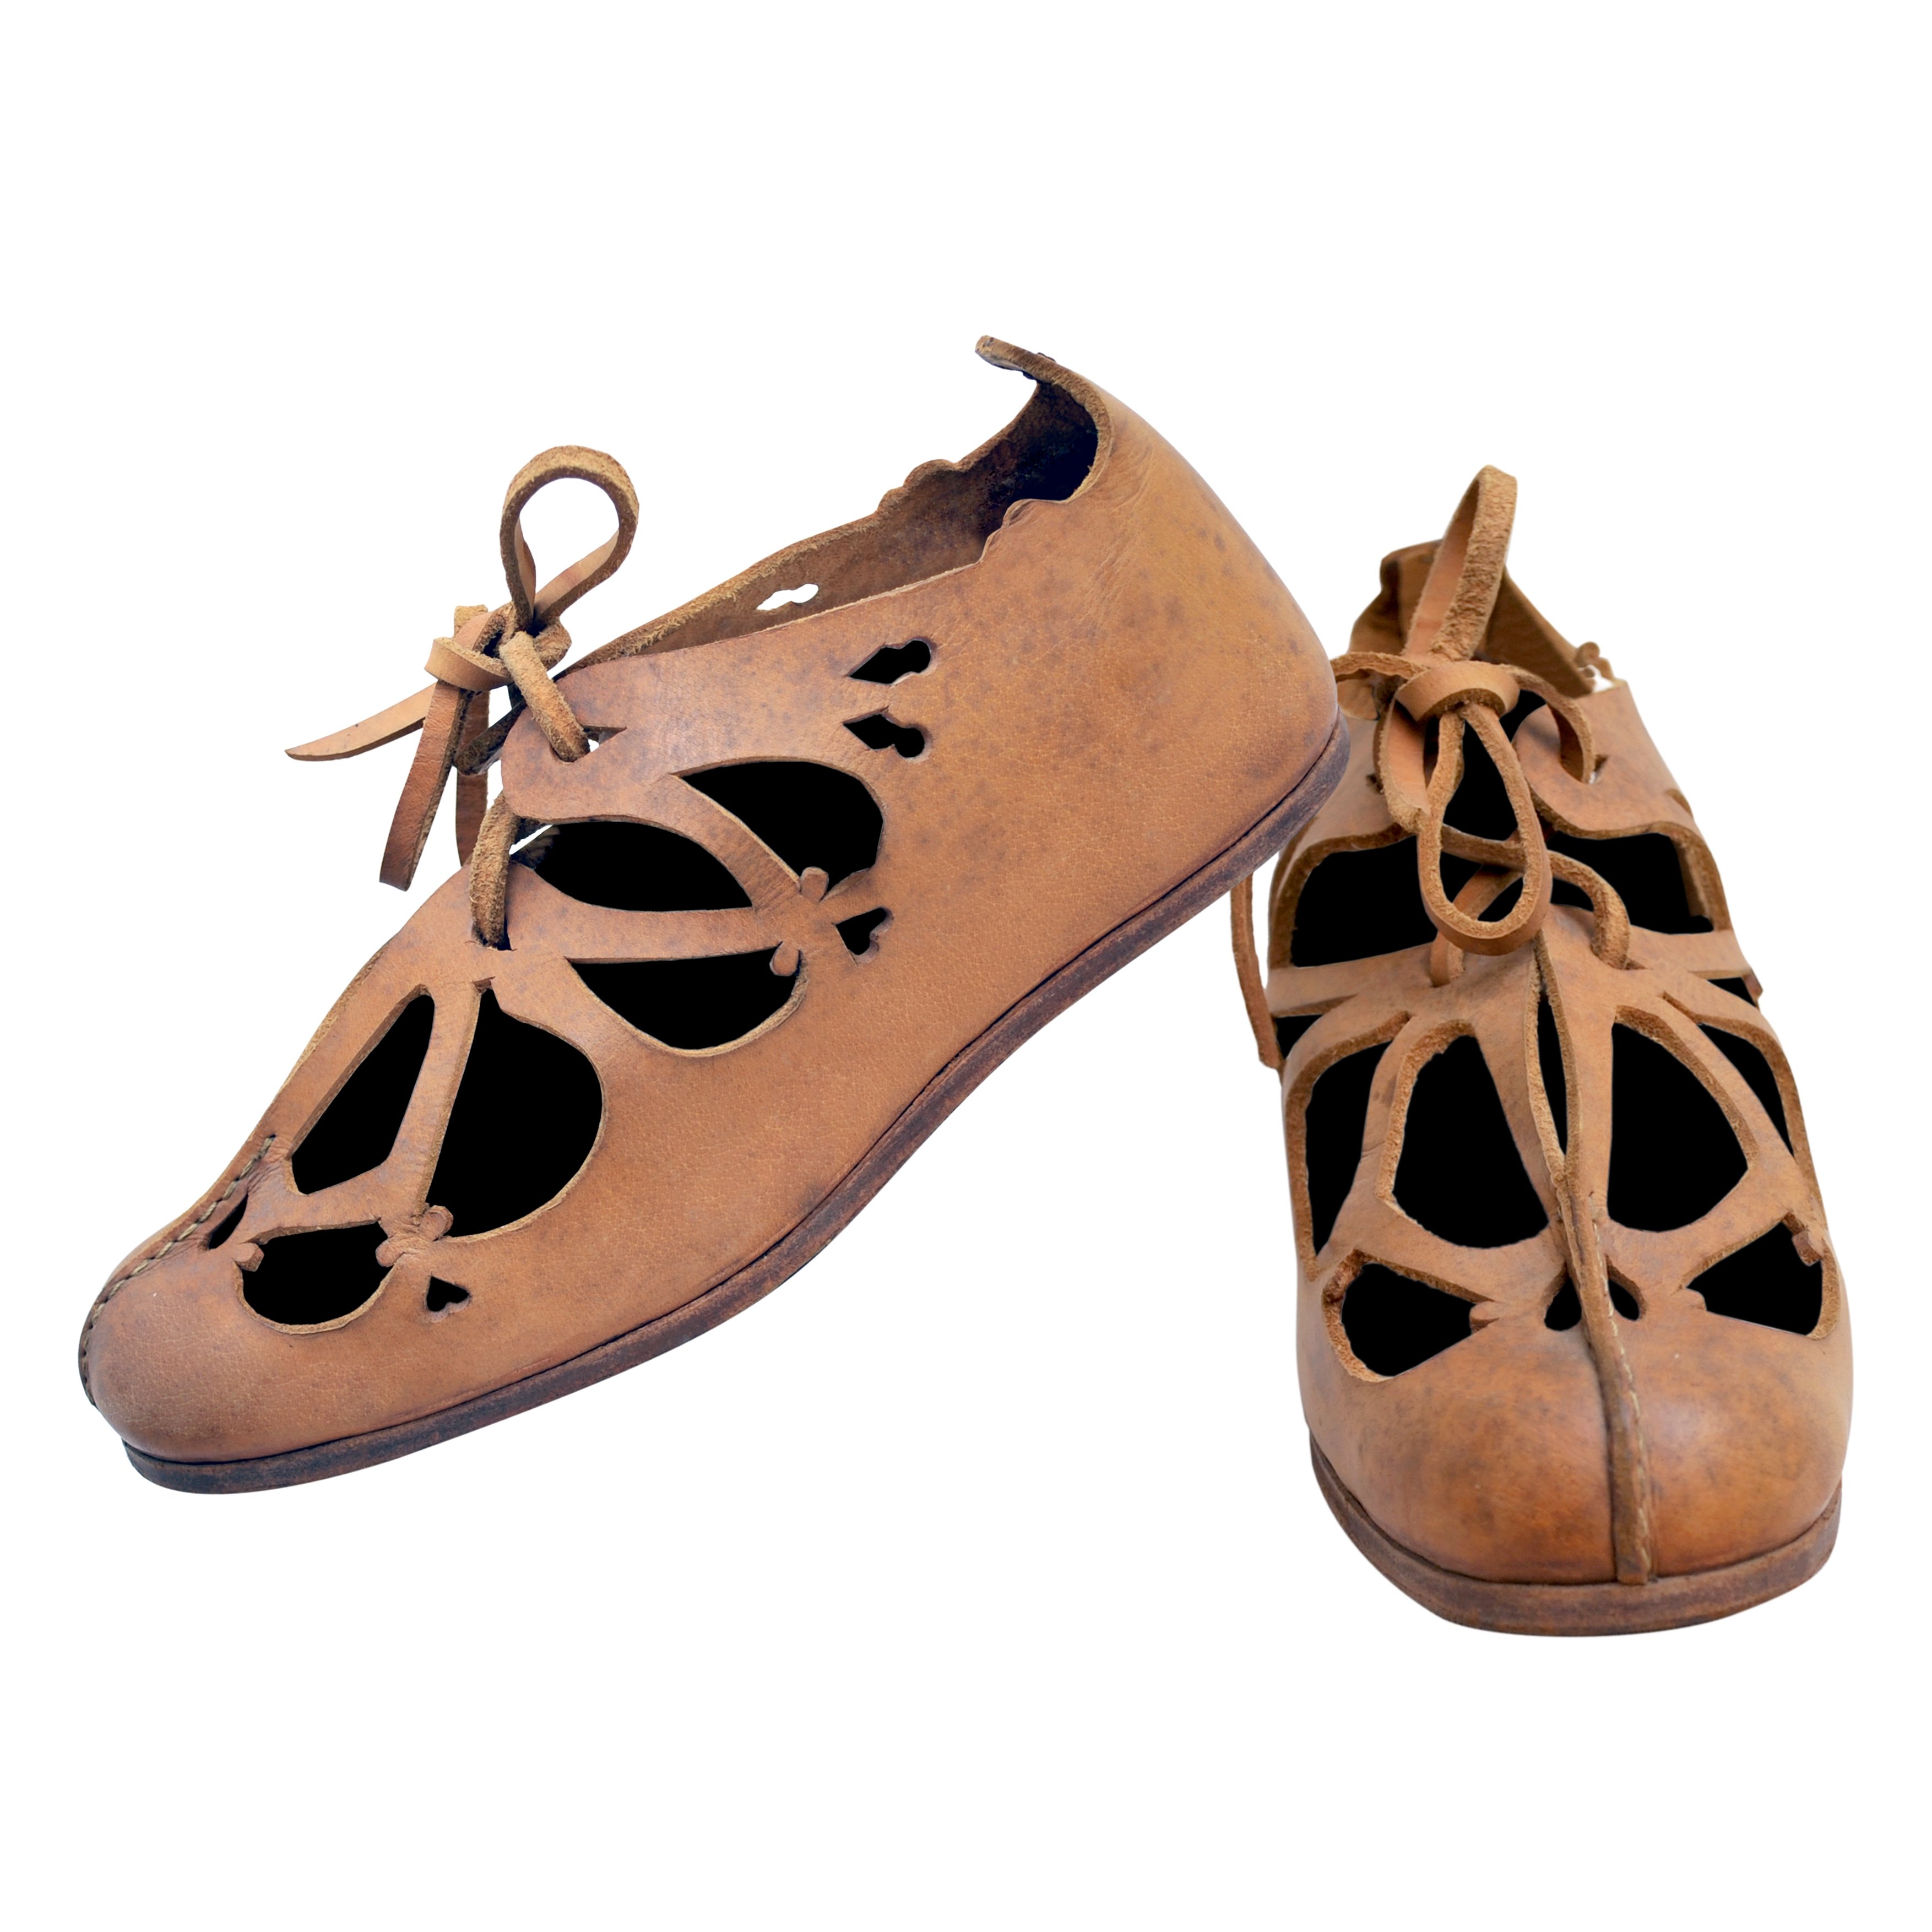 Roman shoes of the Bar Hill type with Hobils, Size 10